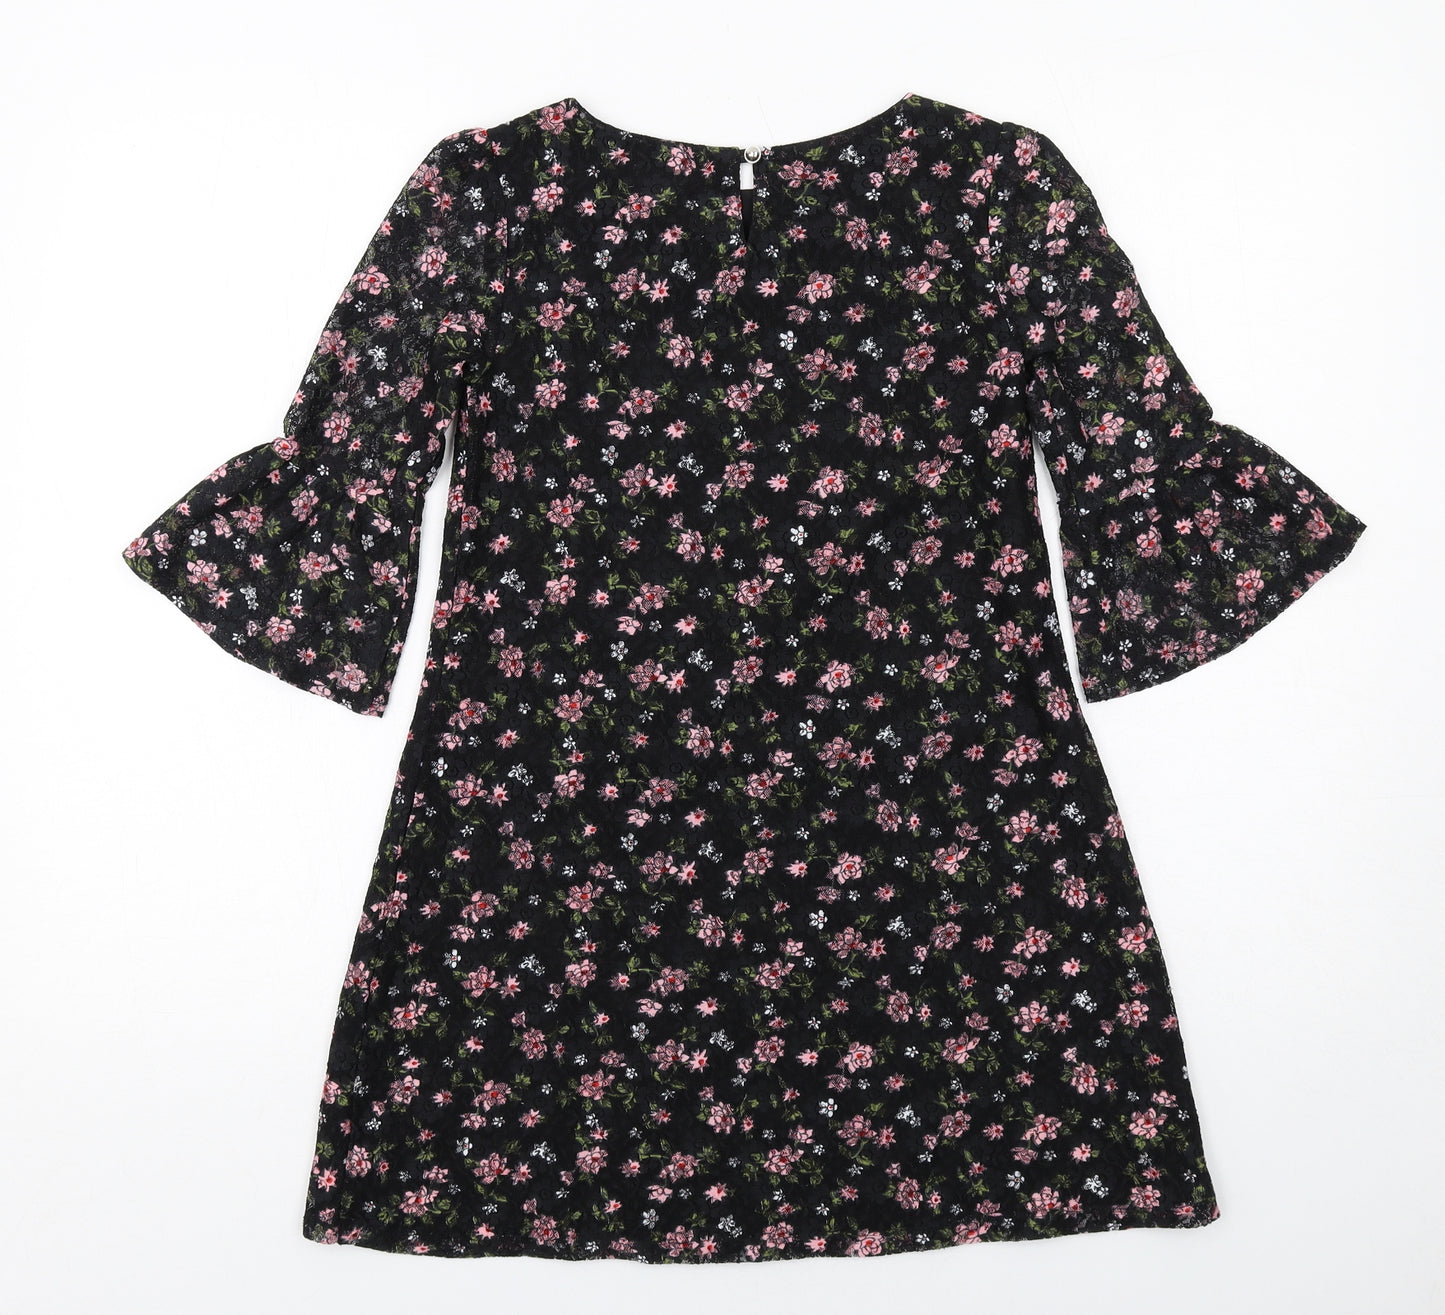 Yumi Girls Black Floral Polyester A-Line Size 9-10 Years Boat Neck Button - Flute Sleeve